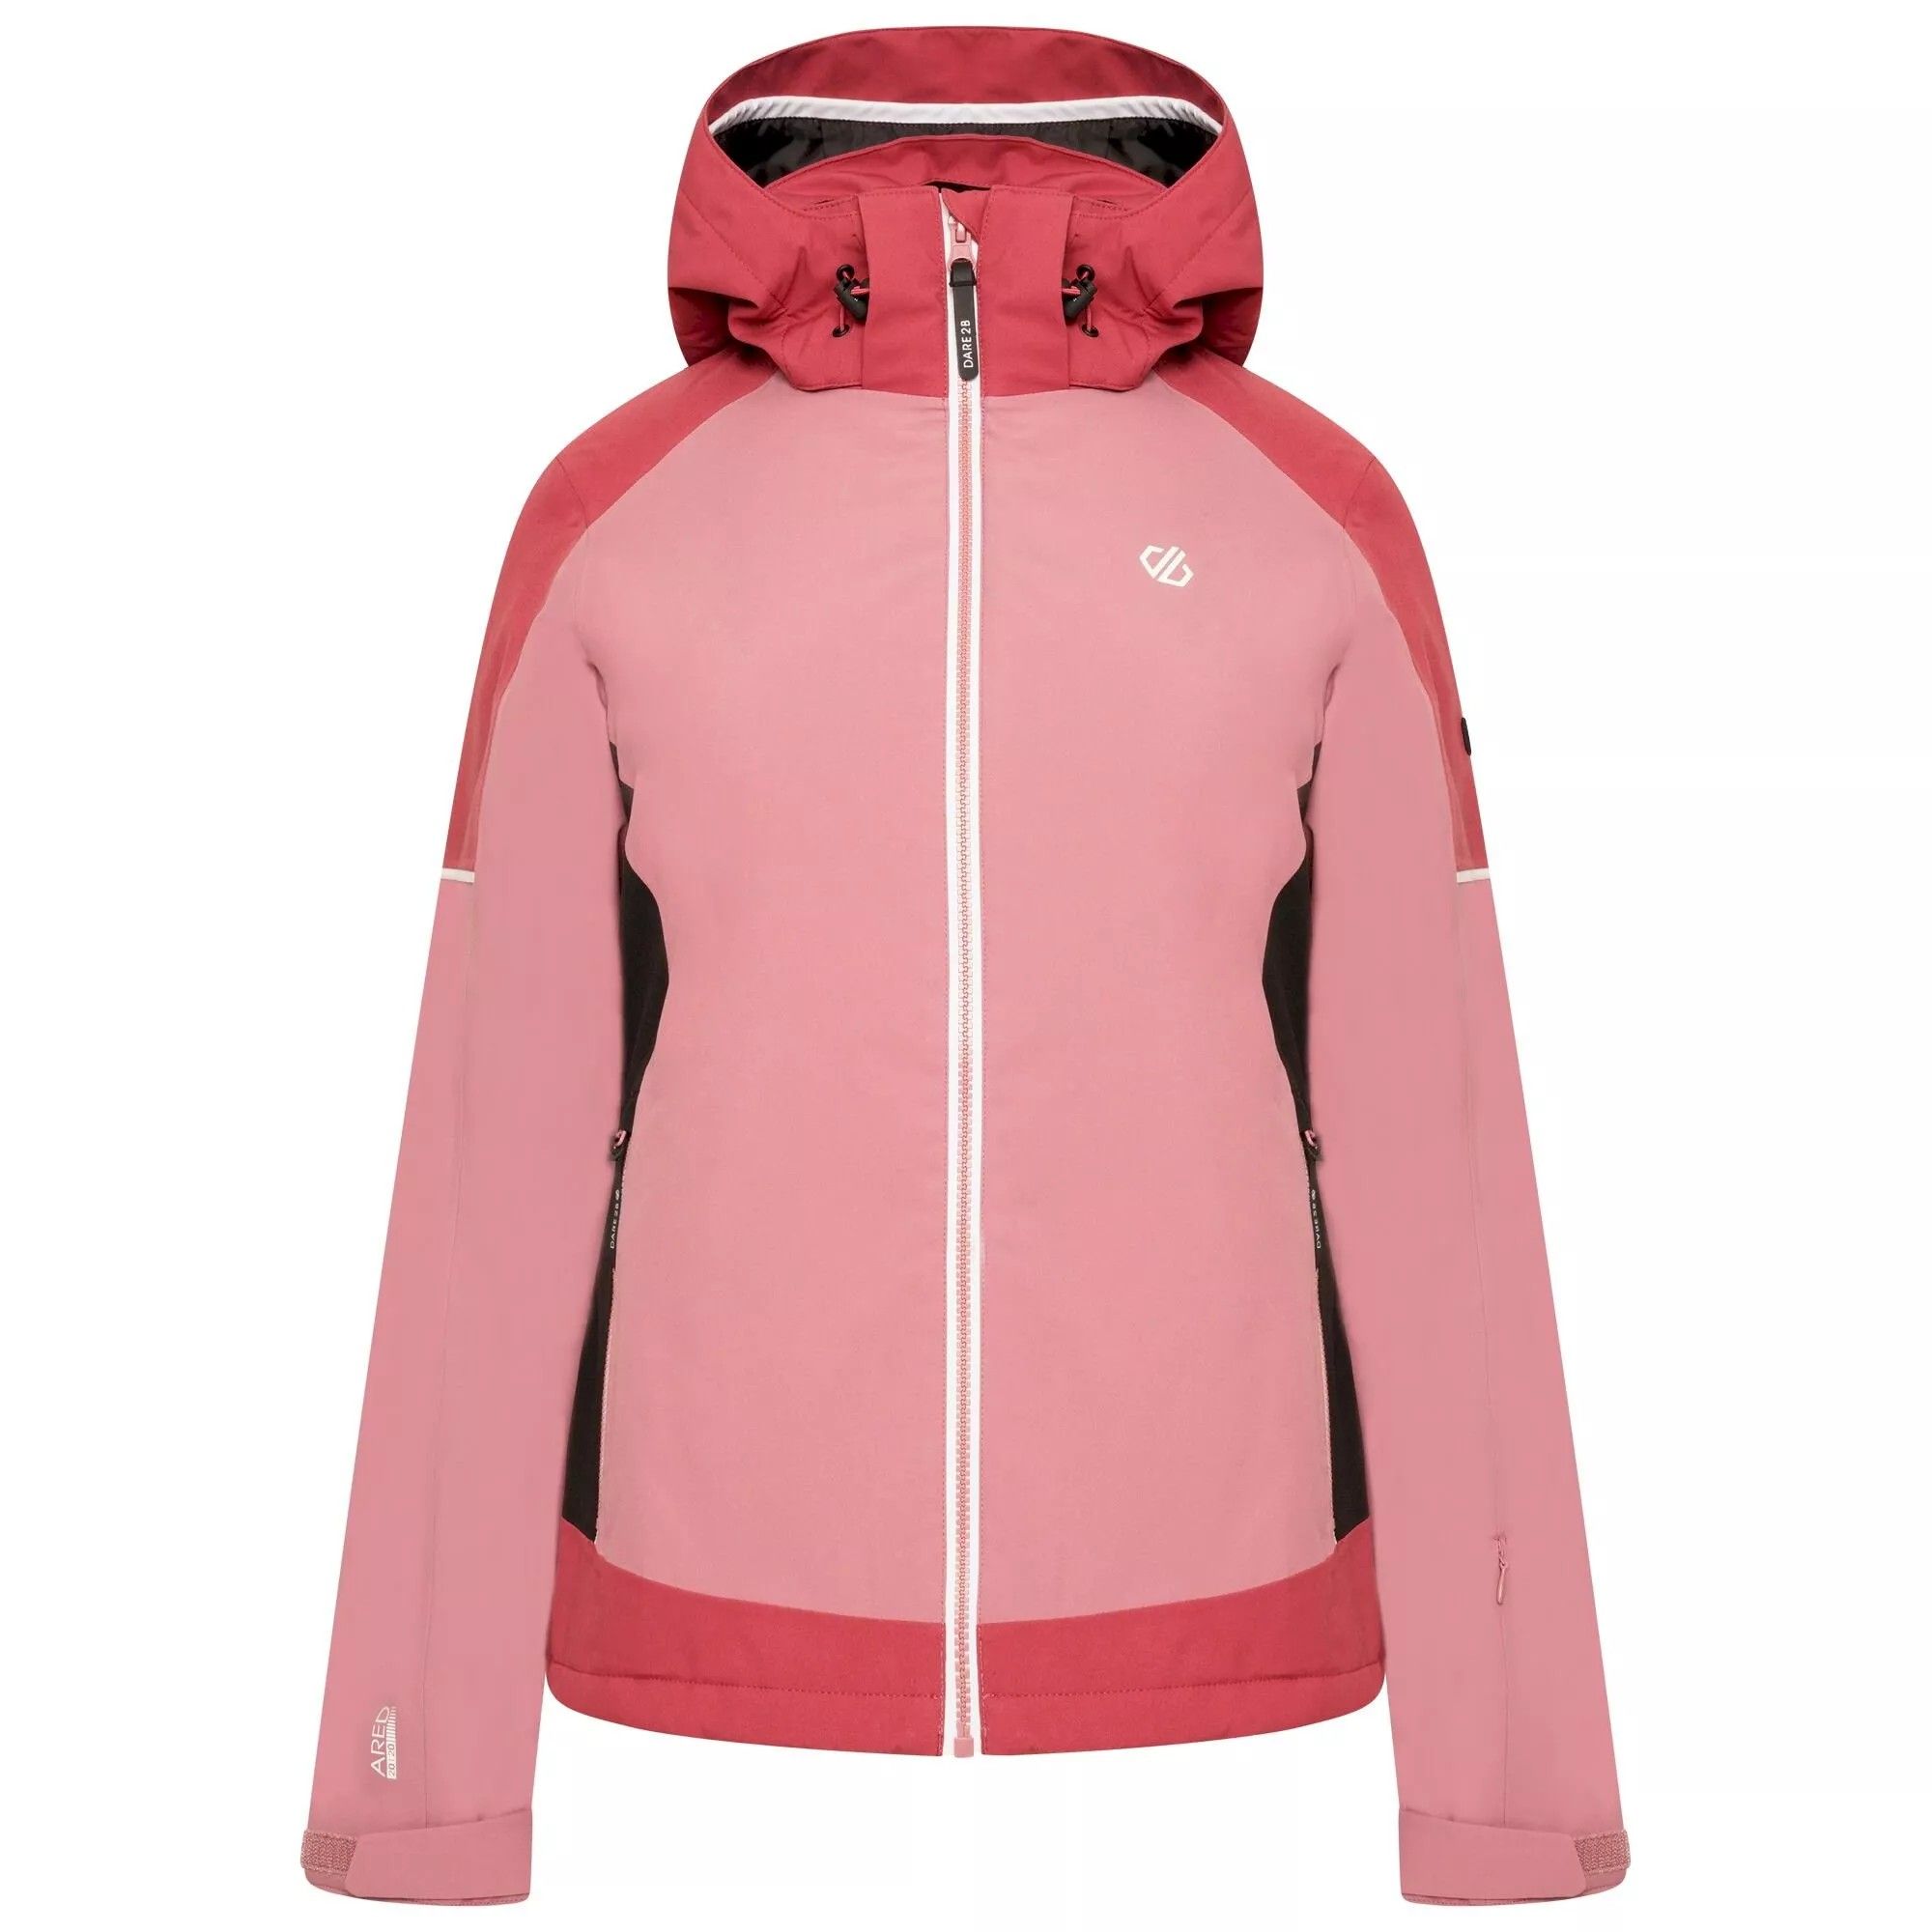 Lining: Scrim. Design: Colour Block, Logo. Fabric Technology: ARED 20/30, Breathable, DWR Finish, Waterproof. Gel Grip, Goggle Stash With Lens Wipe, High Warmth, Snowskirt, Taped Seams. Cuff: Adjustable. Sleeve-Type: Articulated, Long-Sleeved. Neckline: High-Neck, Hooded. Hood Features: Adjustable, Packaway, Technical. Pockets: Ski Pass Pocket, 2 Lower Pockets, Zip, 2 Internal Pockets, Stow Pocket, Mesh Lined. Fastening: Zip. Hem: Adjustable. Sustainability: Made from Recycled Materials.